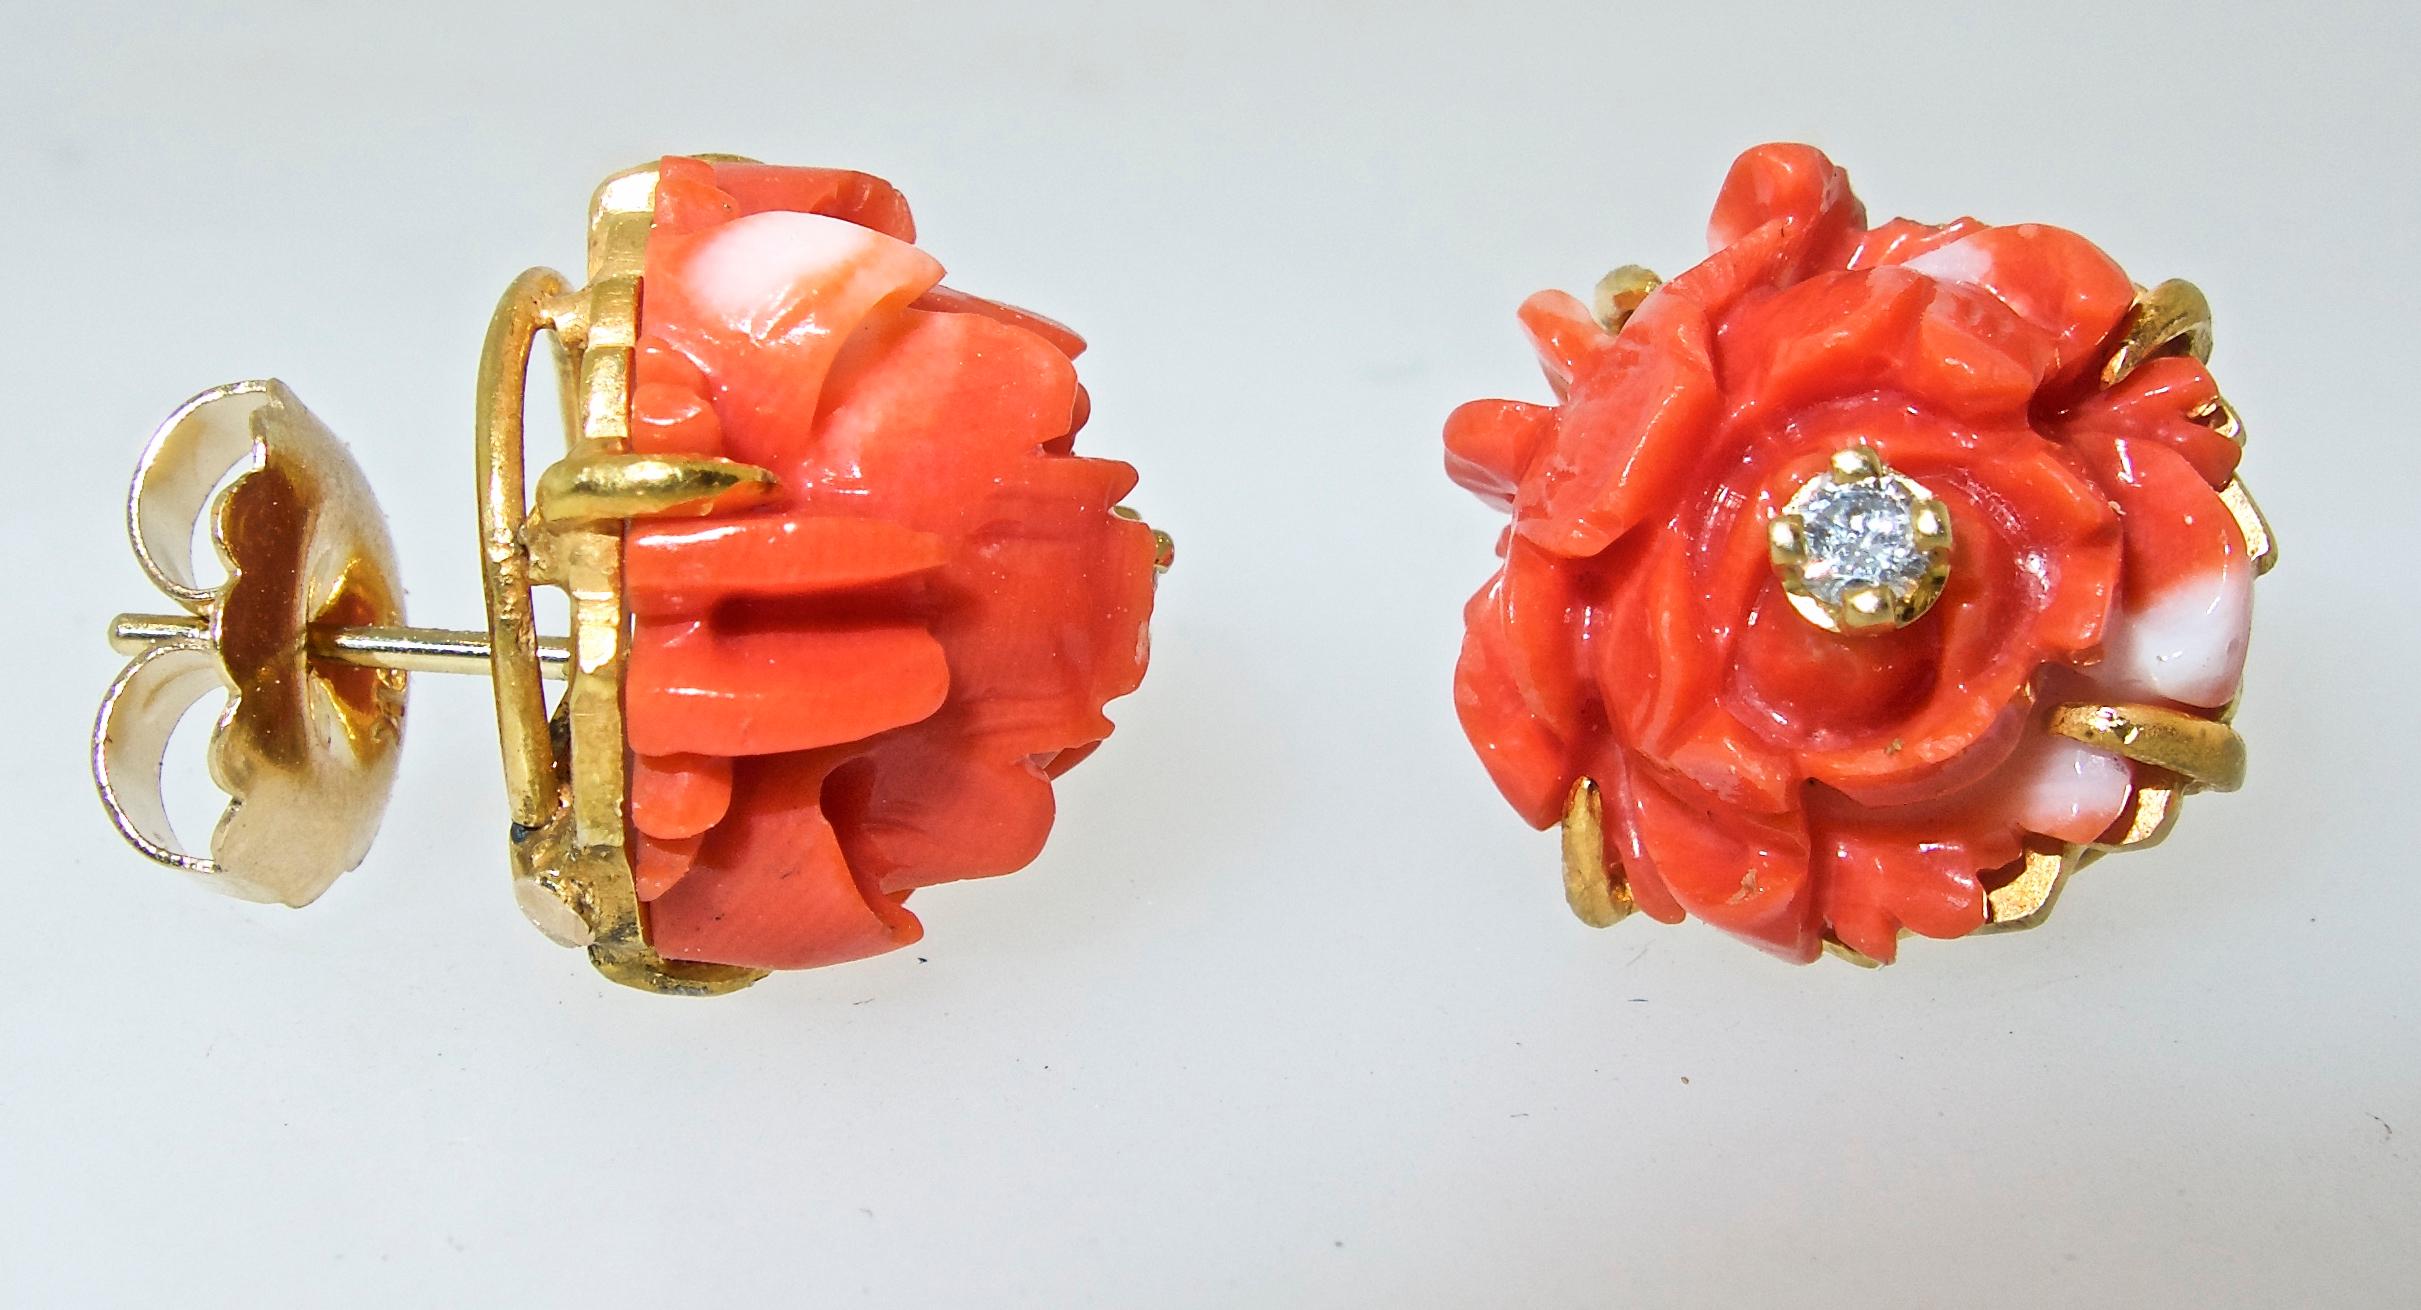 18K yellow gold earrings with natural orange coral carved in a flower motif and set with a white brilliant cut diamond in its center.  The earrings are .50 inches in diameter.  Offered separately is a matching brooch, a photograph has also been